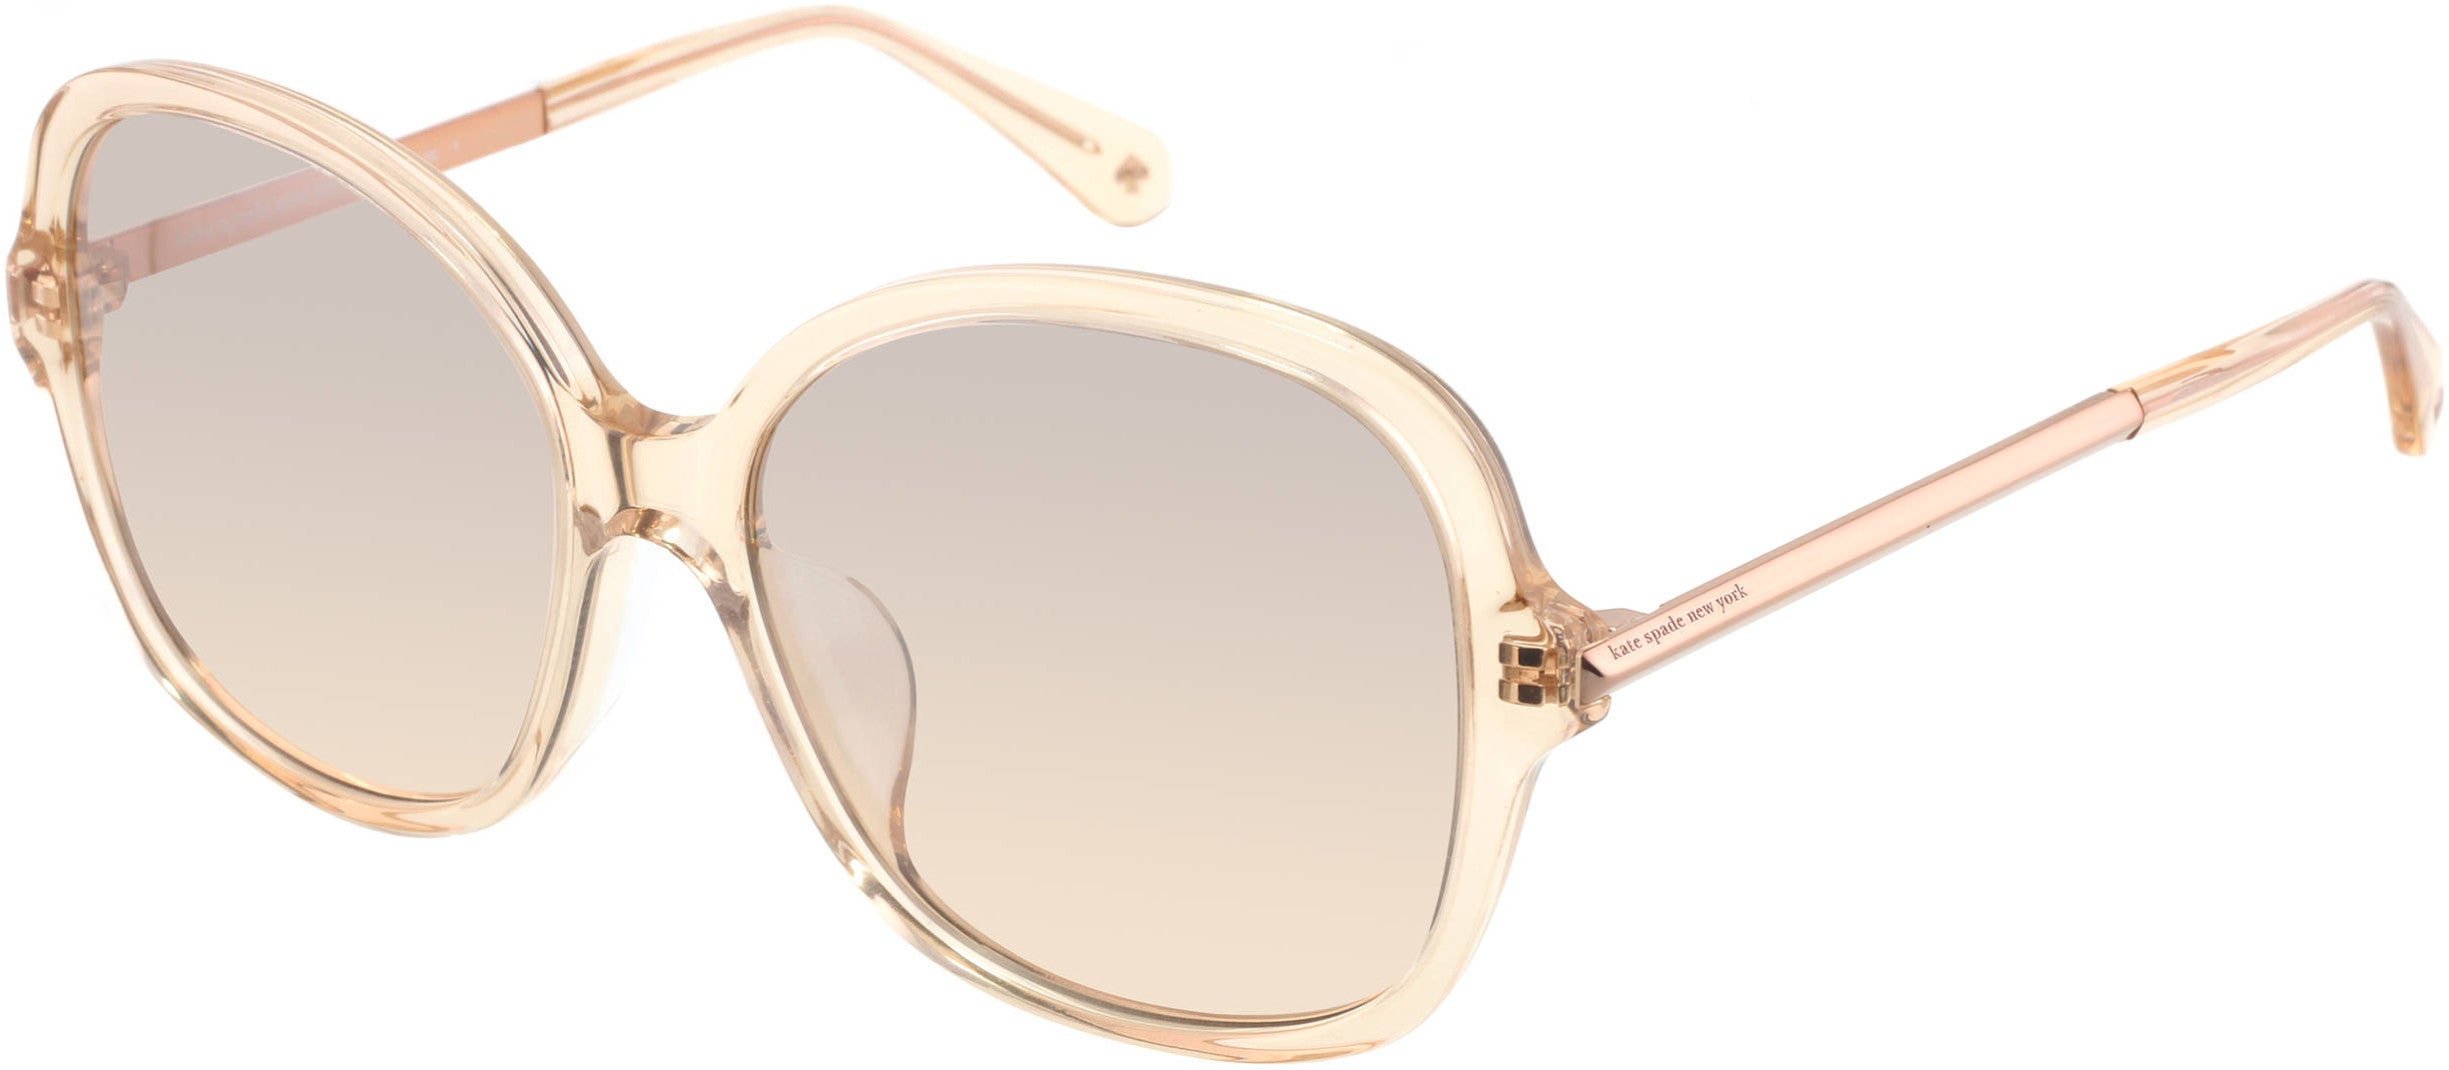 Kate Spade Kaiya/F/S Square Sunglasses 02T3-02T3  Crystal Beige (G4 Silver Mirror Shaded Brown)